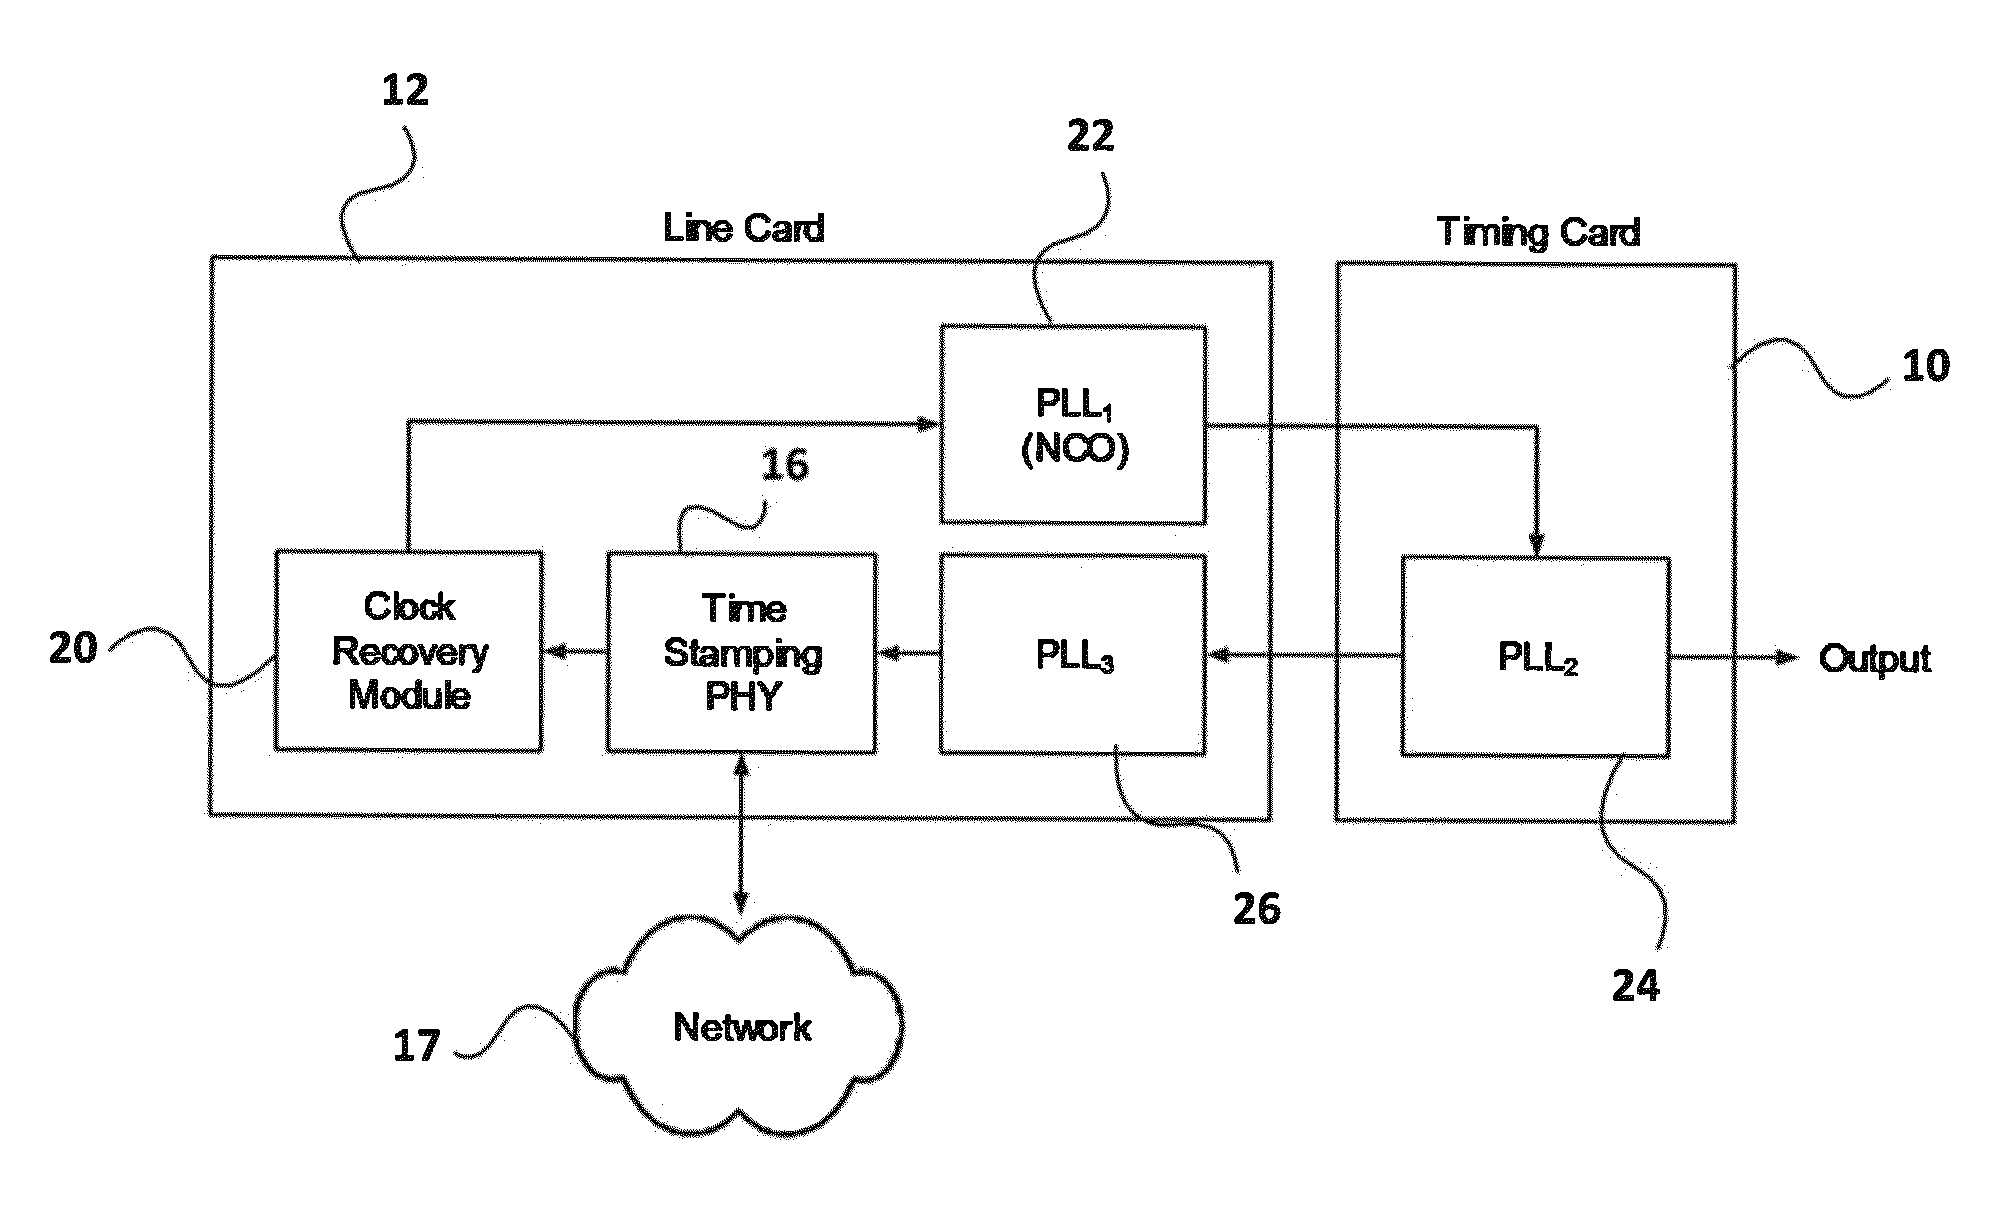 Network interface with clock recovery module on line card